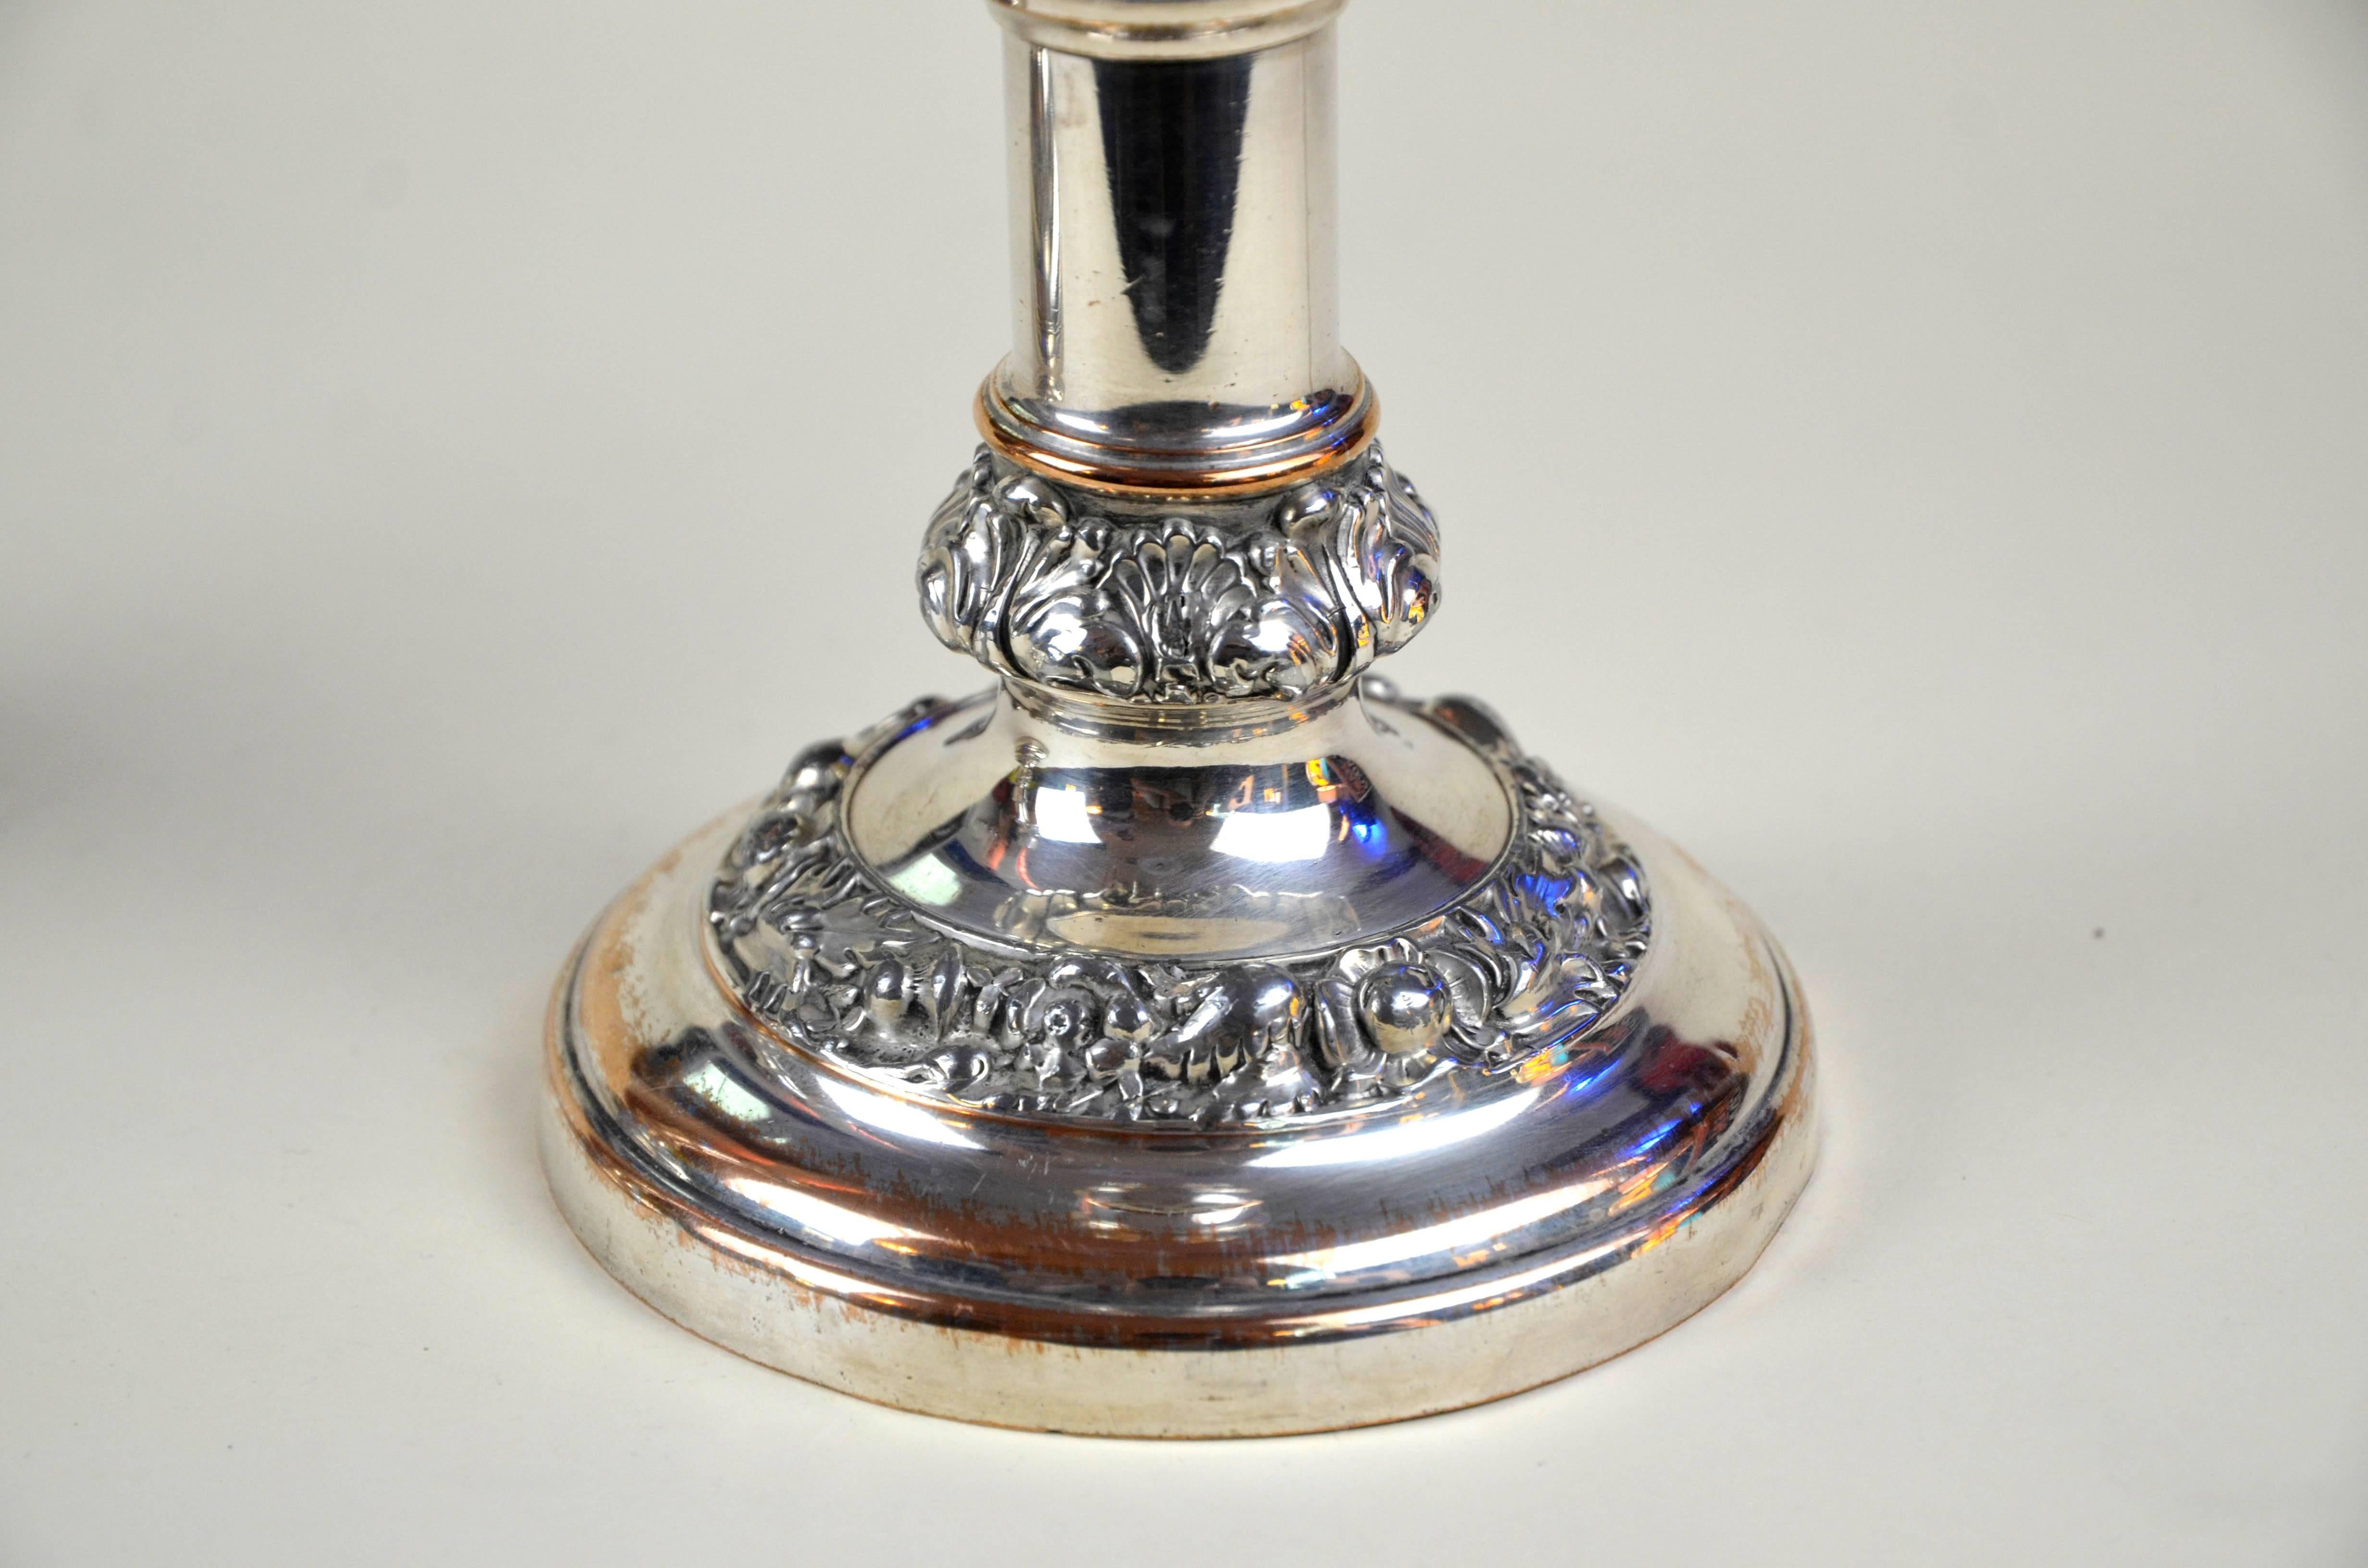 1820s Pair of English Georgian Old Sheffield Plate Telescopic Candlesticks For Sale 3